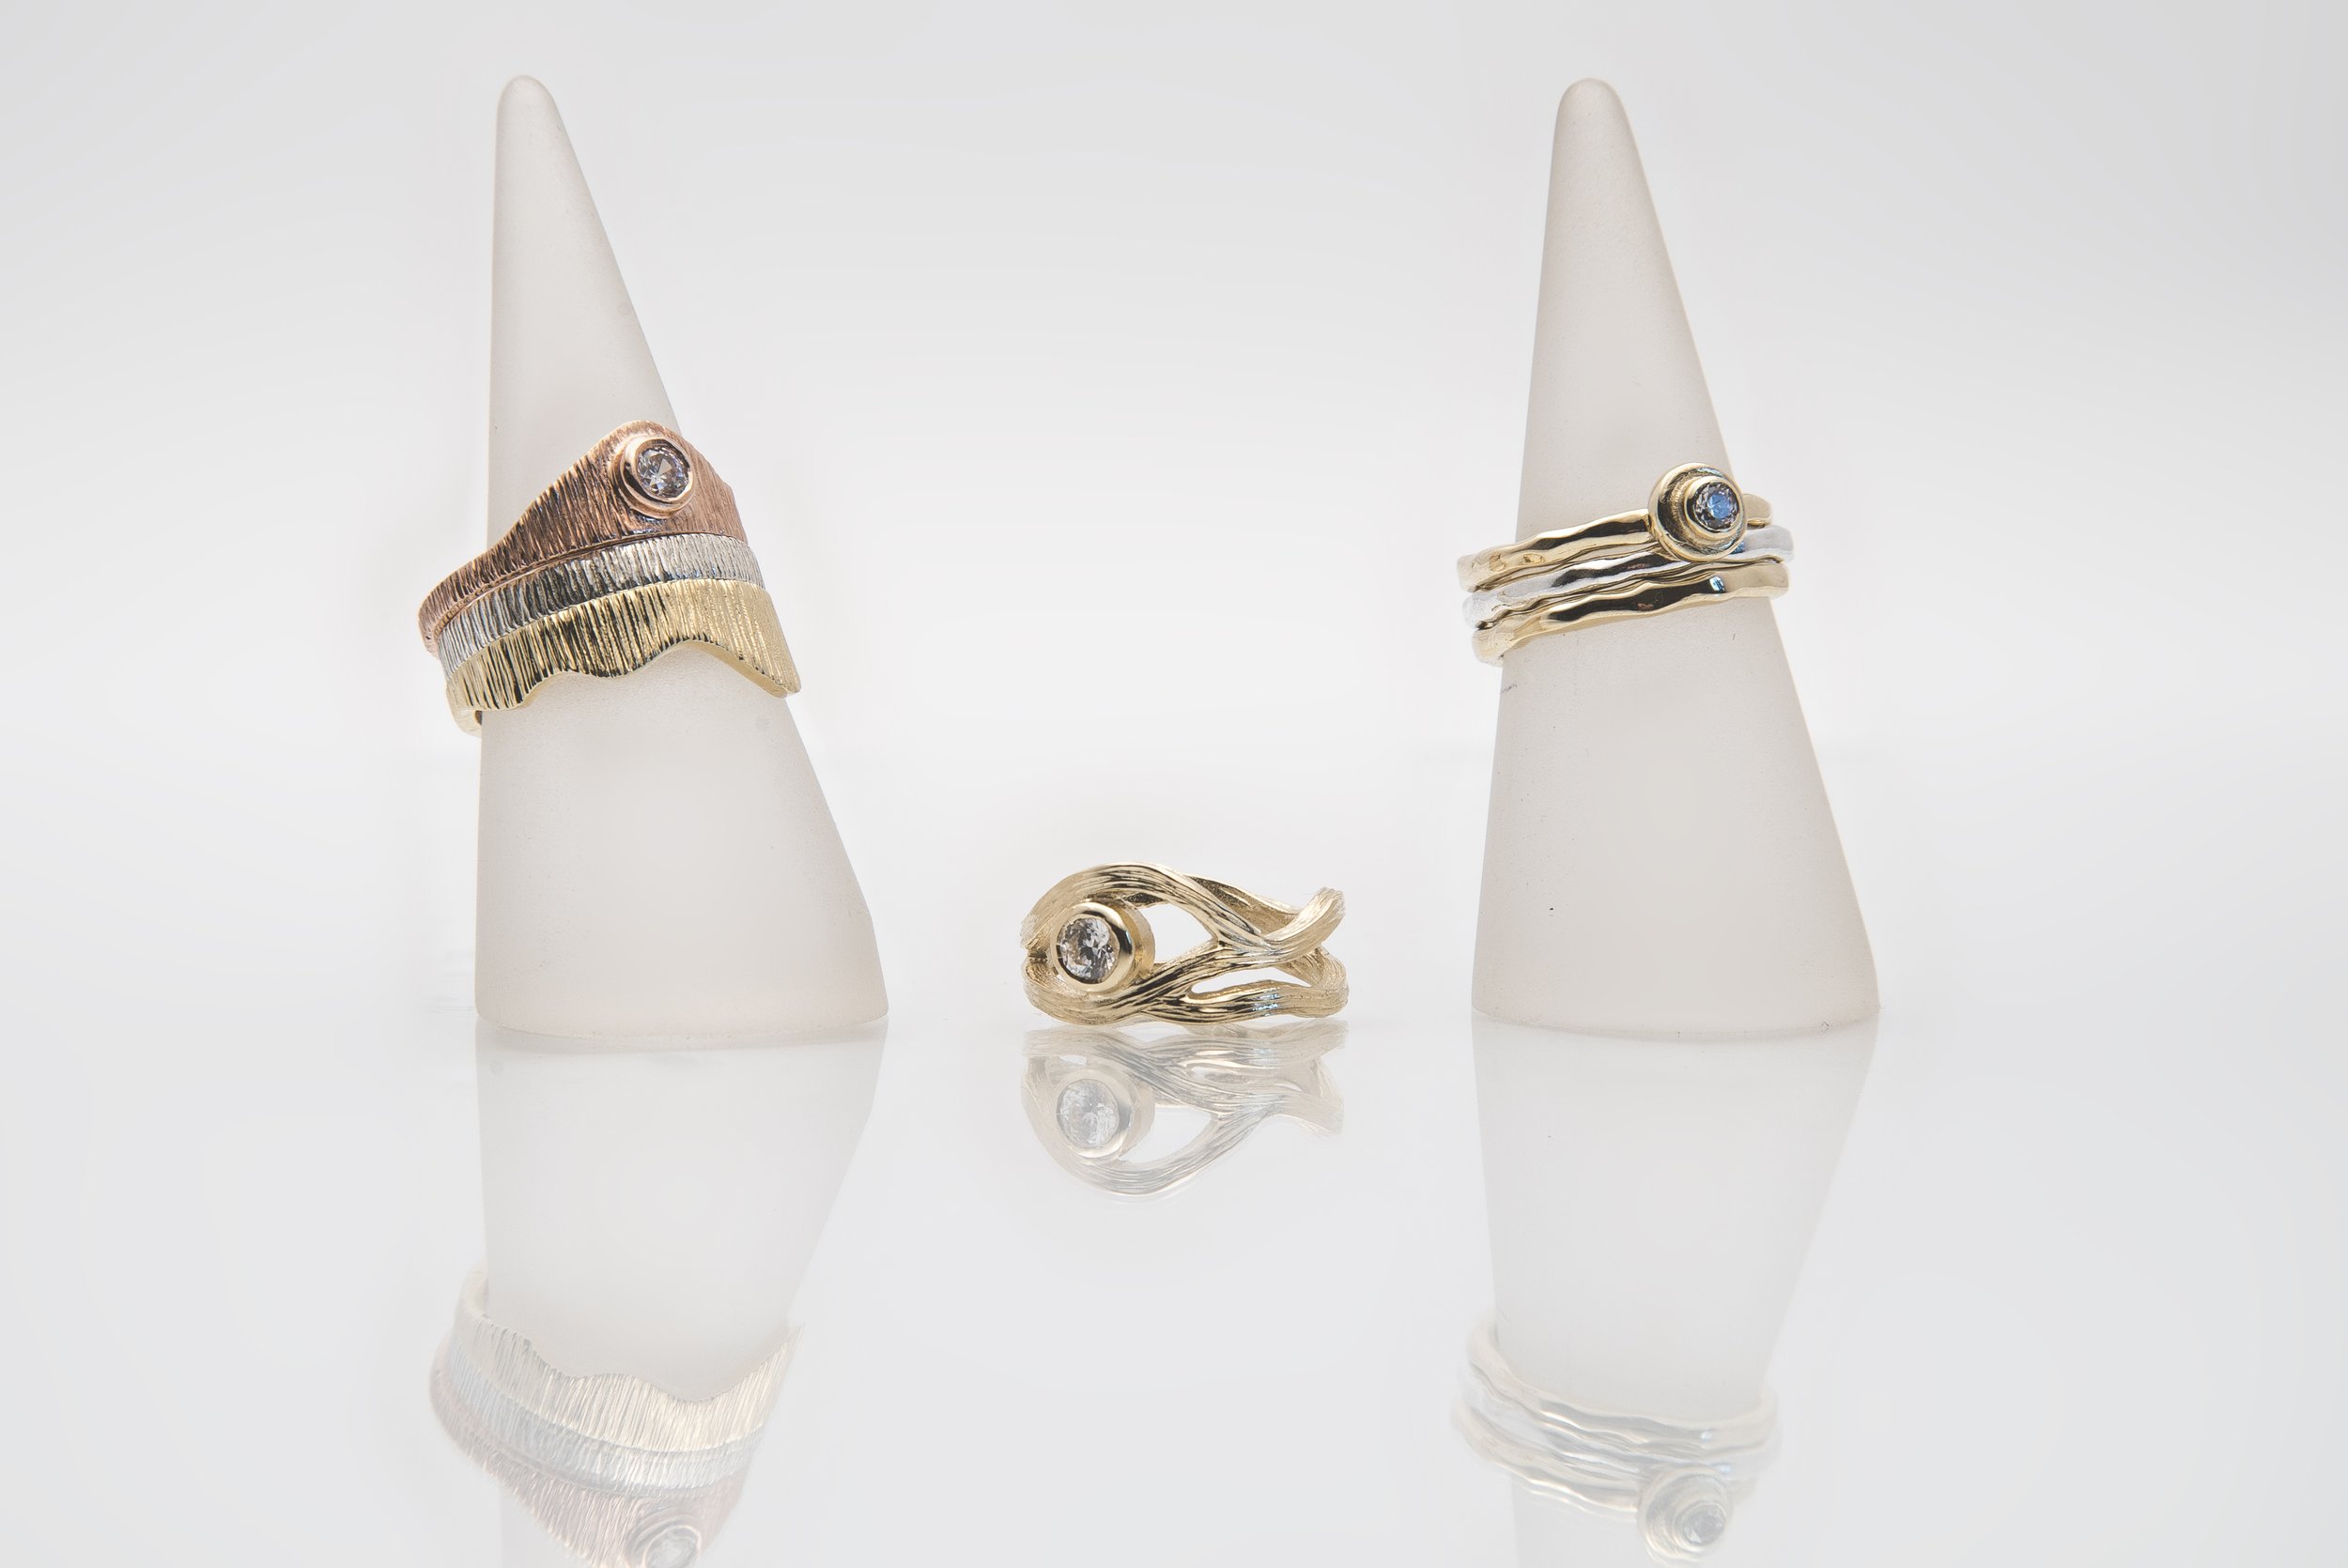 Island Links, Shore and Pearl River. 3 stunning collections of designer rings in hallmarked gold by Martina Hamilton